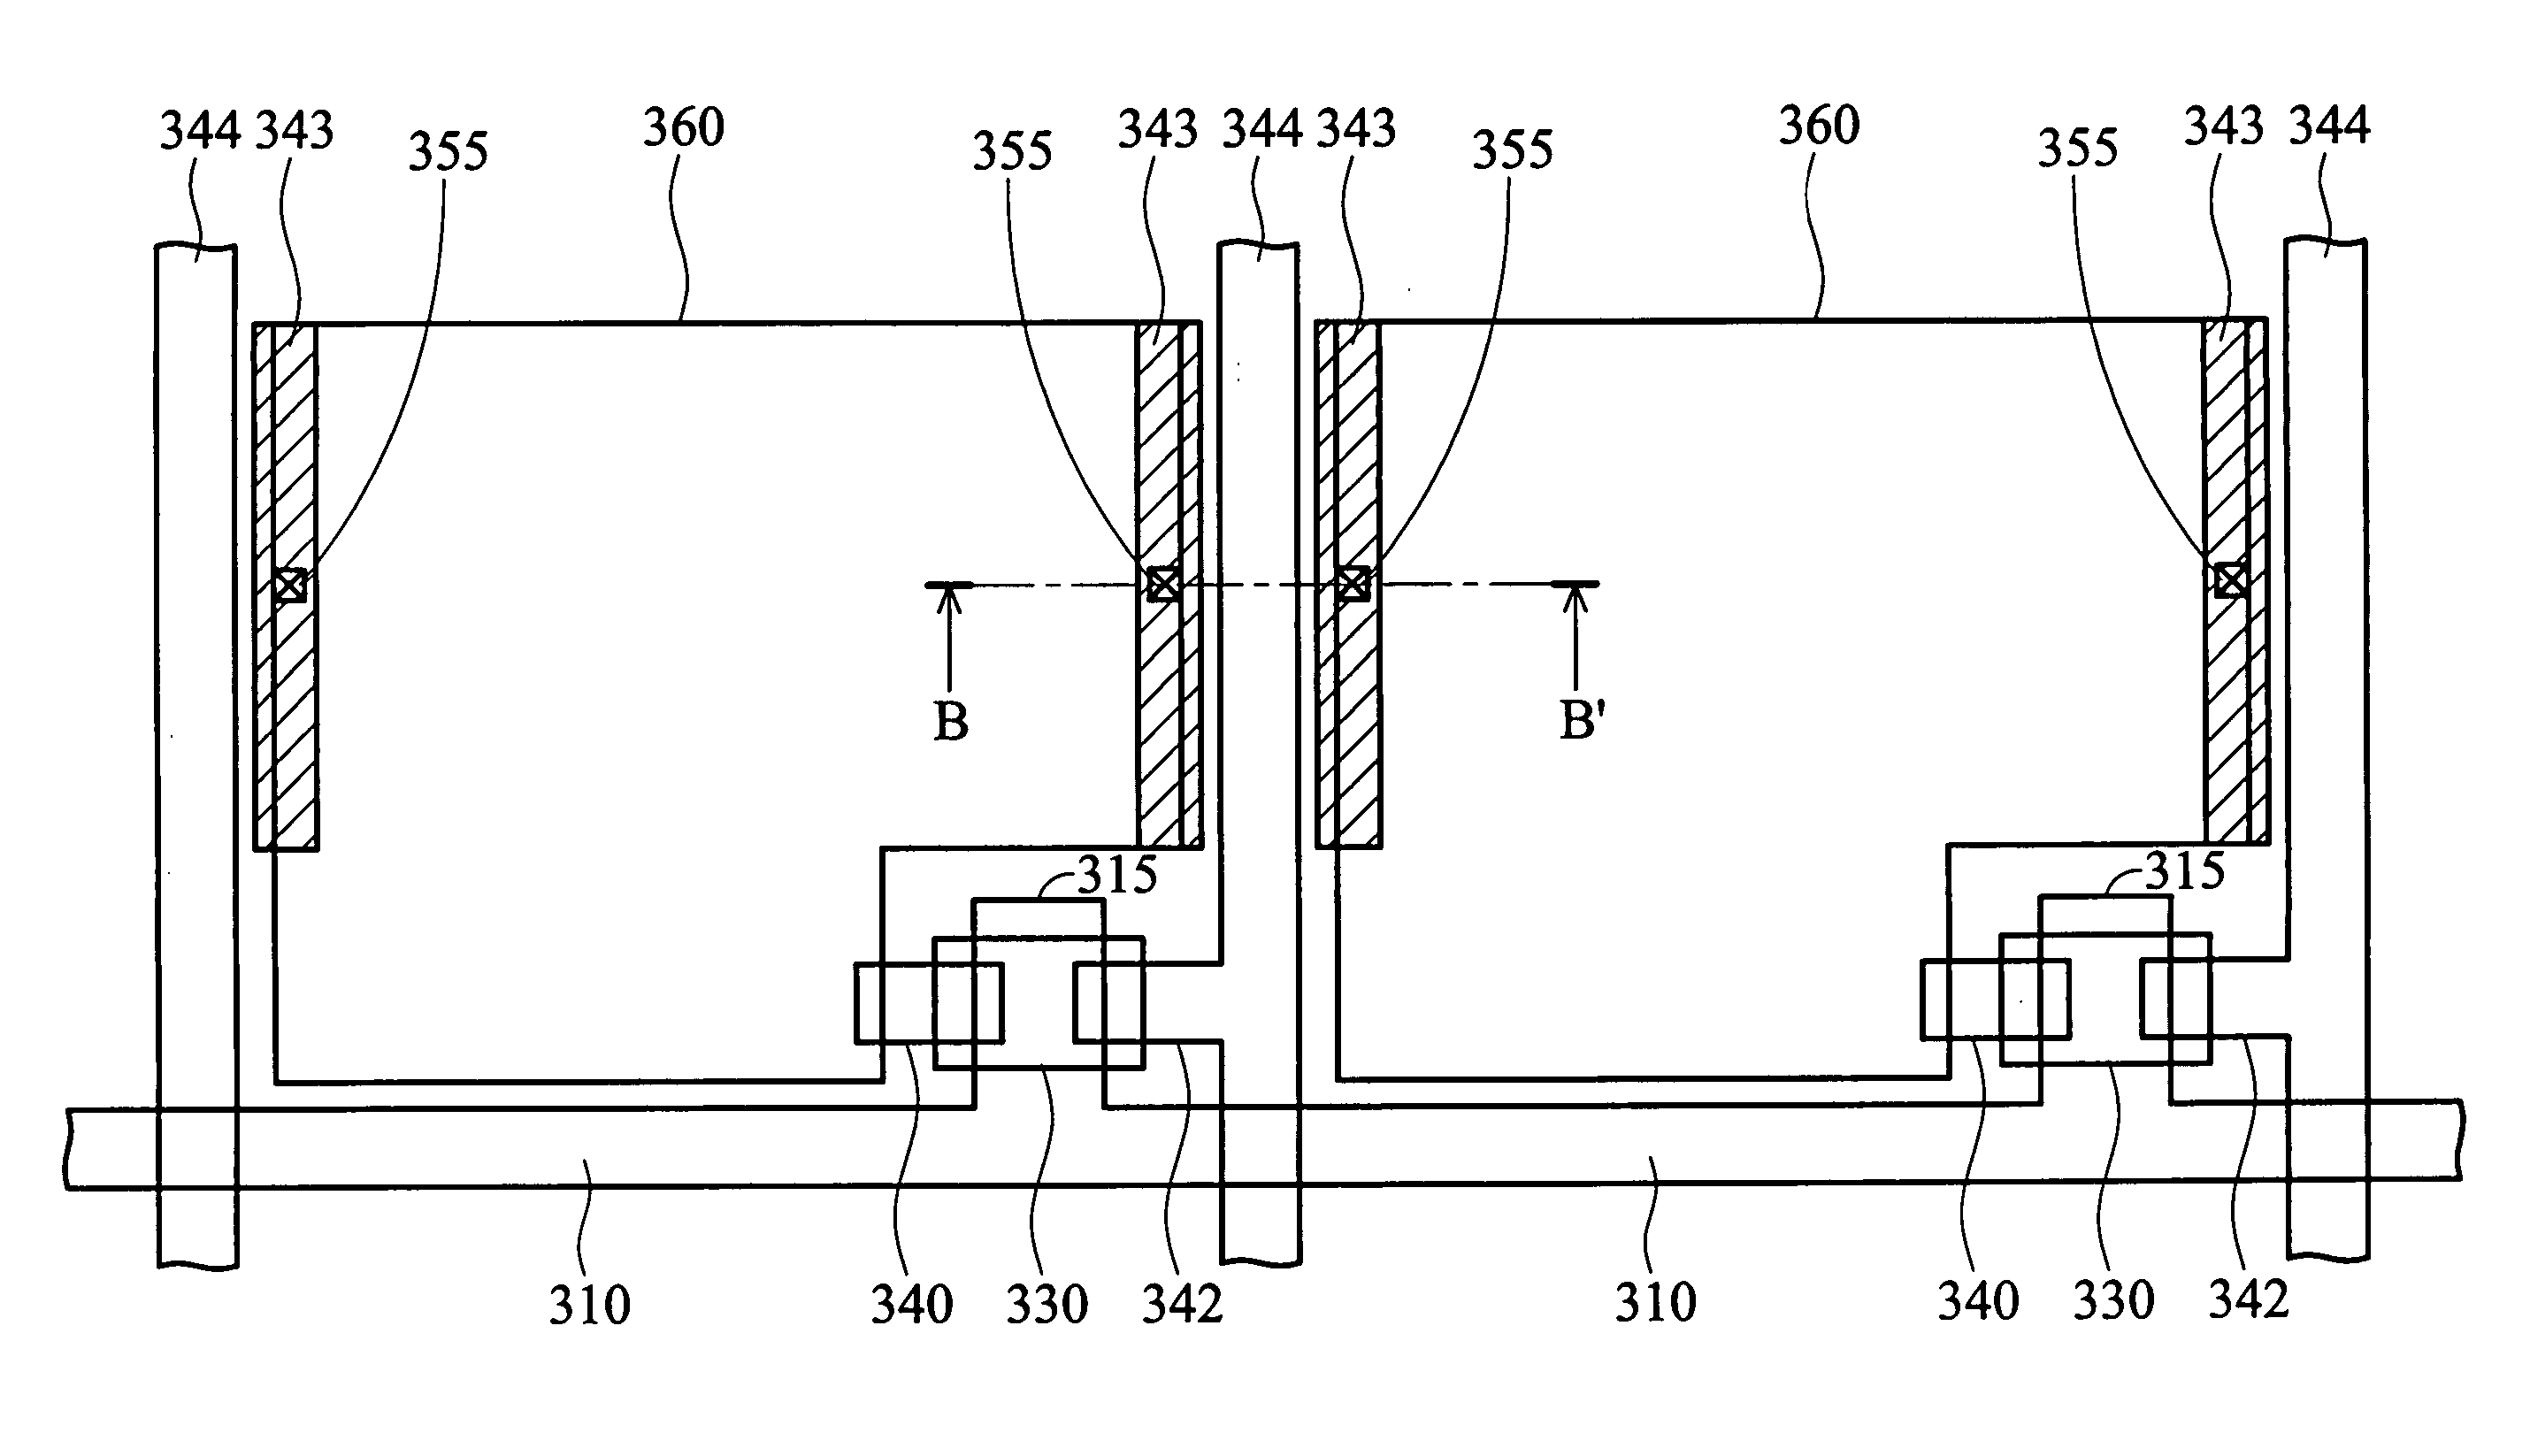 Method of stabilizing parasitic capacitance in an LCD device